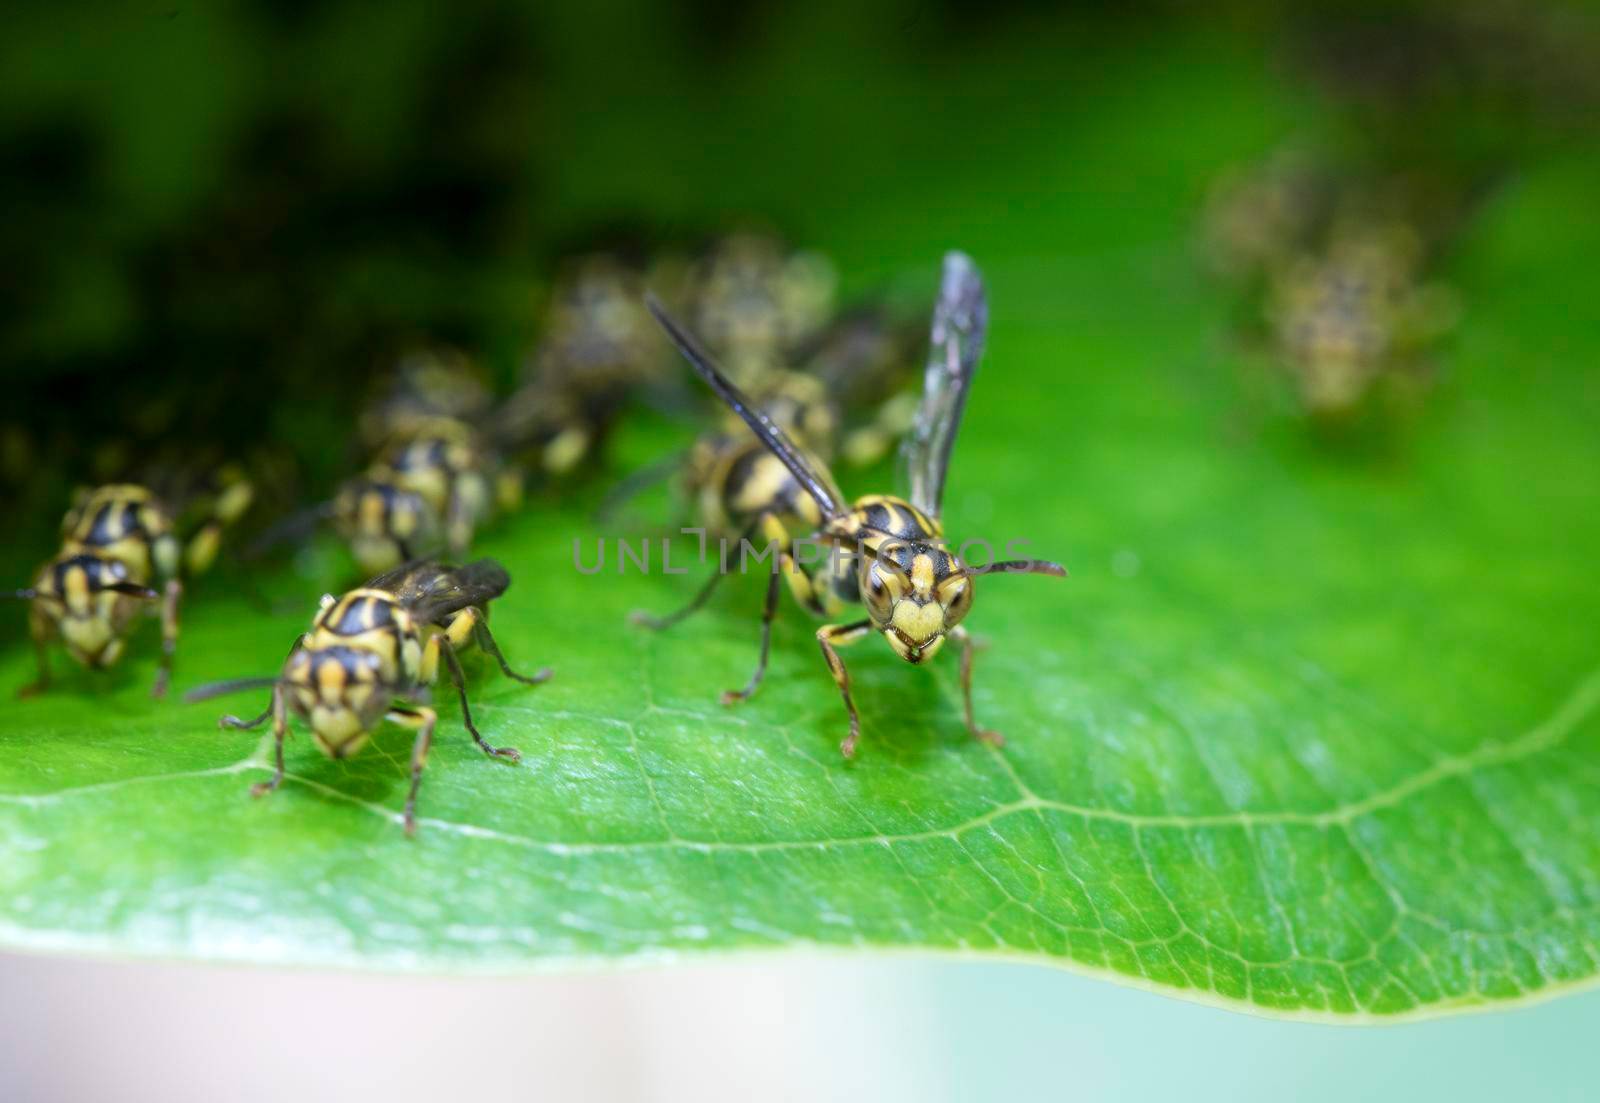 Wasp on green leaf with nest and family in background by drpnncpp